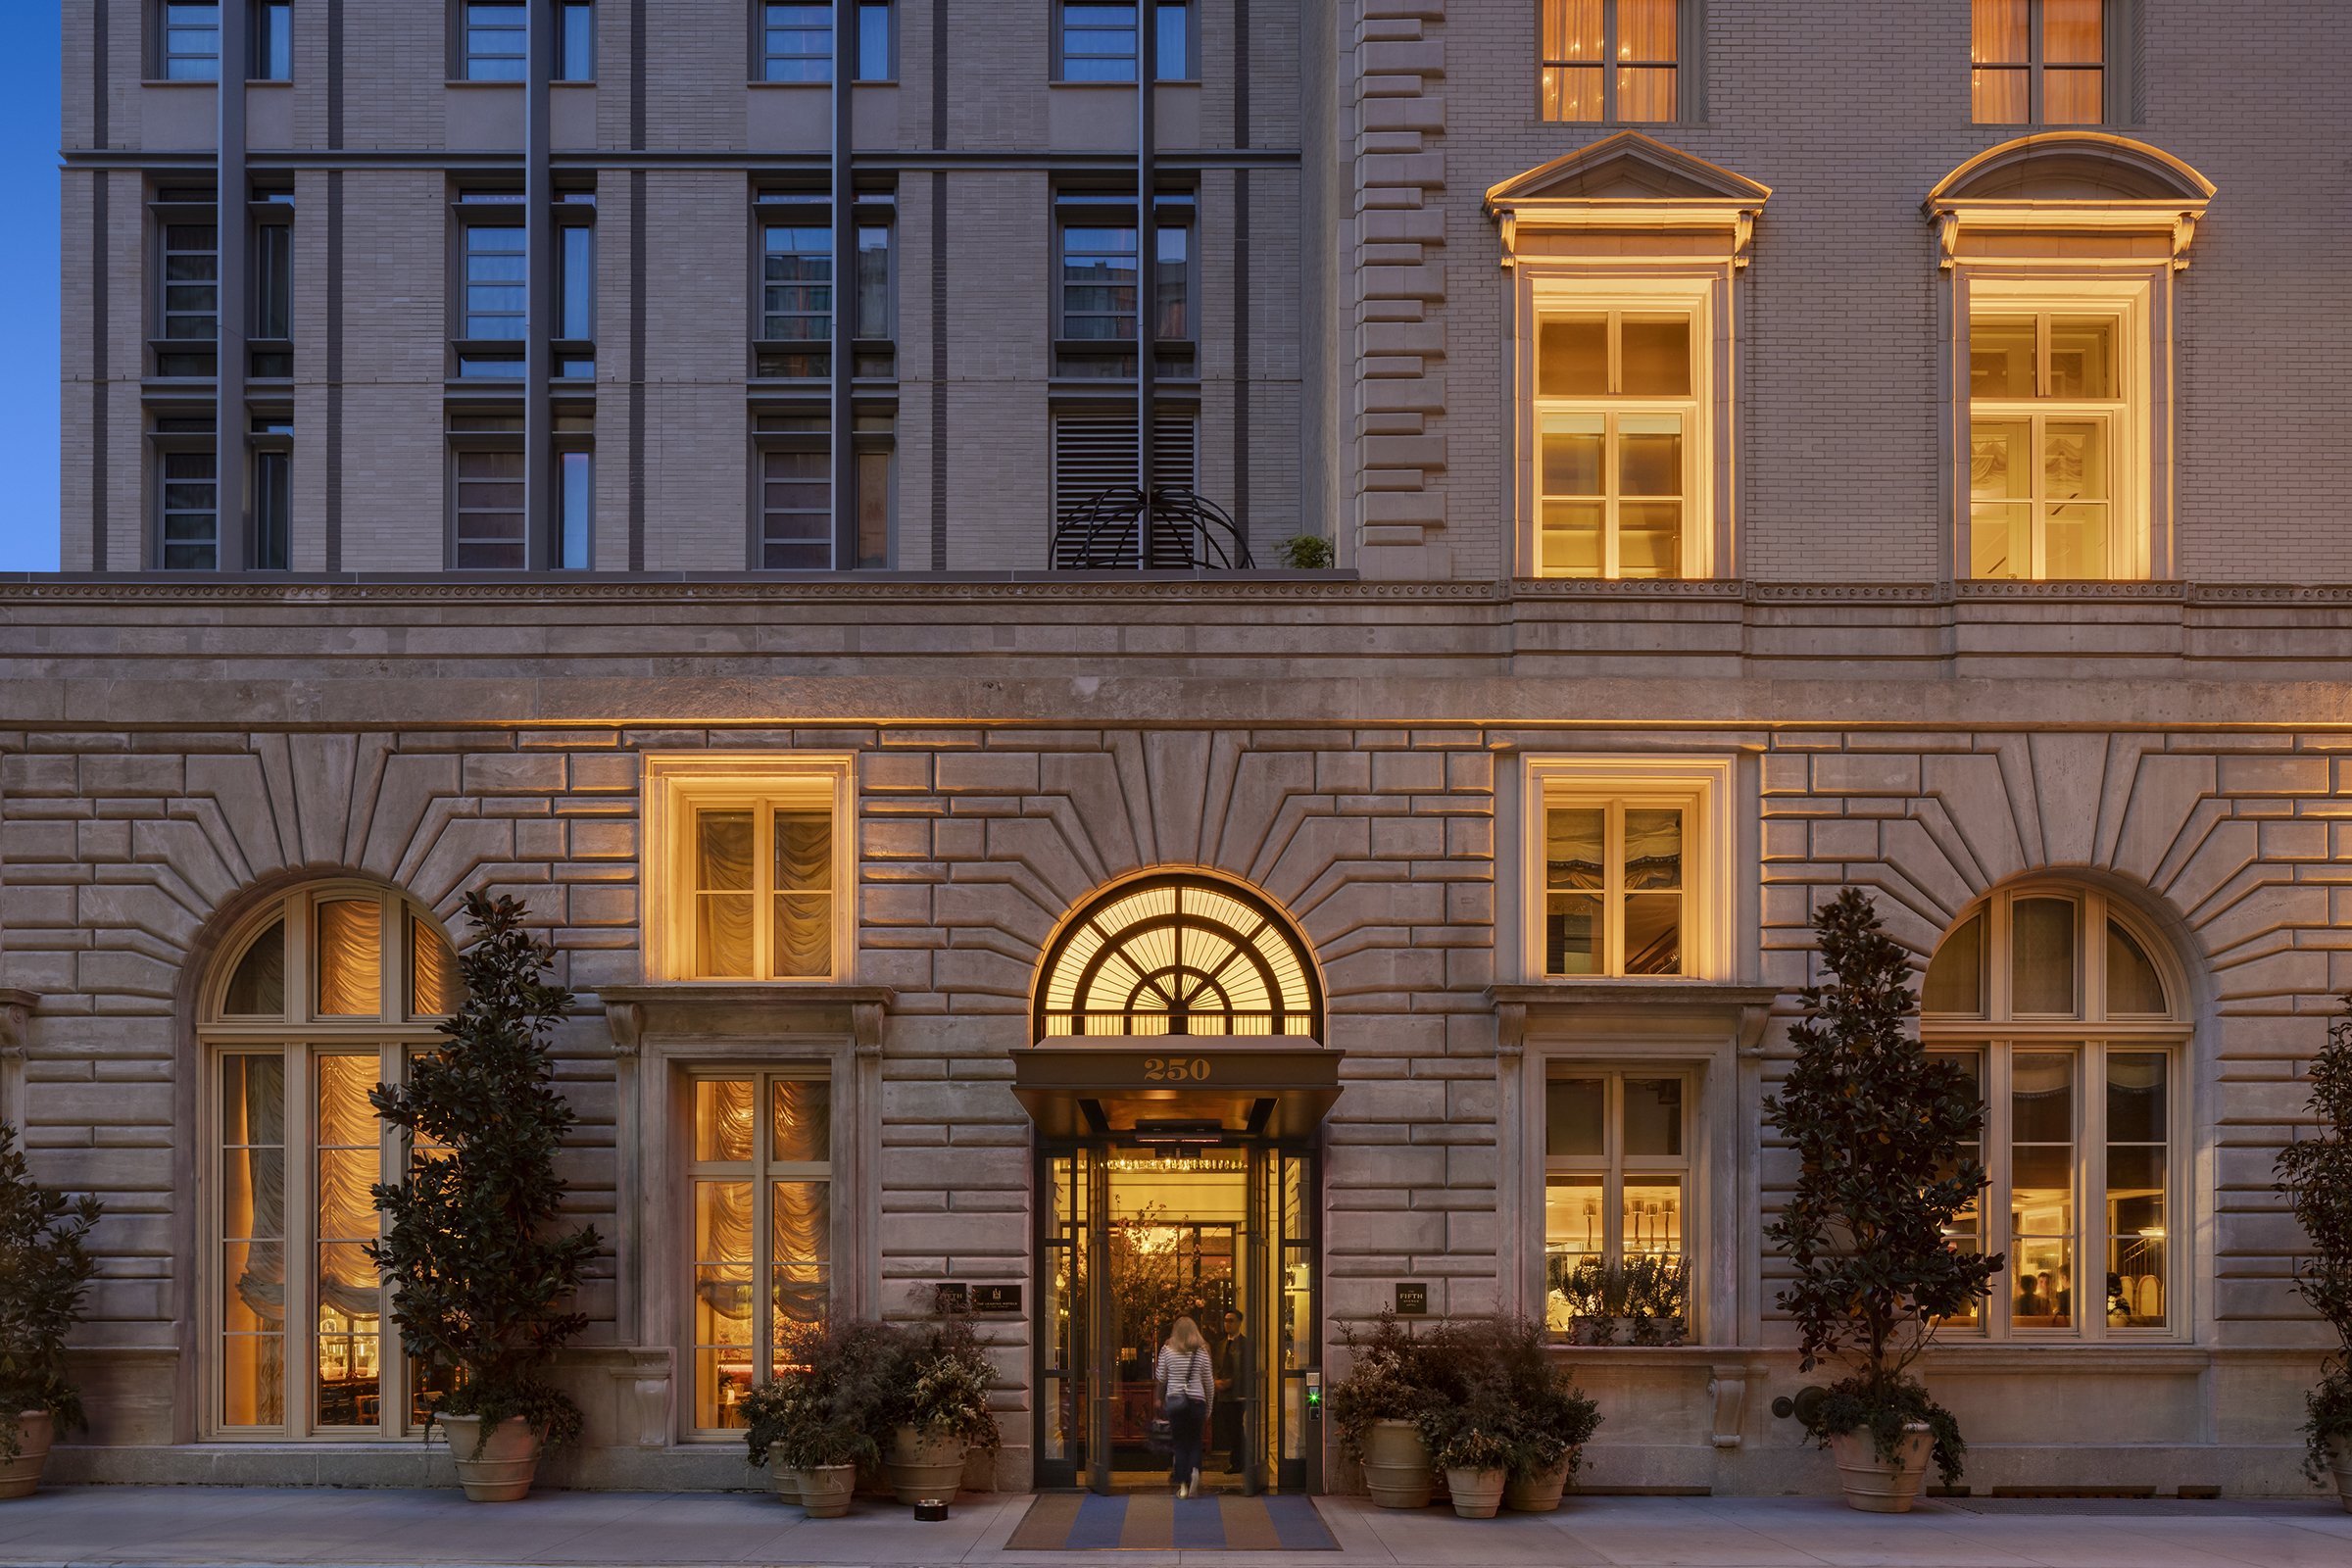 The Fifth Ave Hotel_Photo Ext Entrance Hotel 2 Dusk_Photograph by Andrew Rugge - Copyright Perkins Eastman.jpg